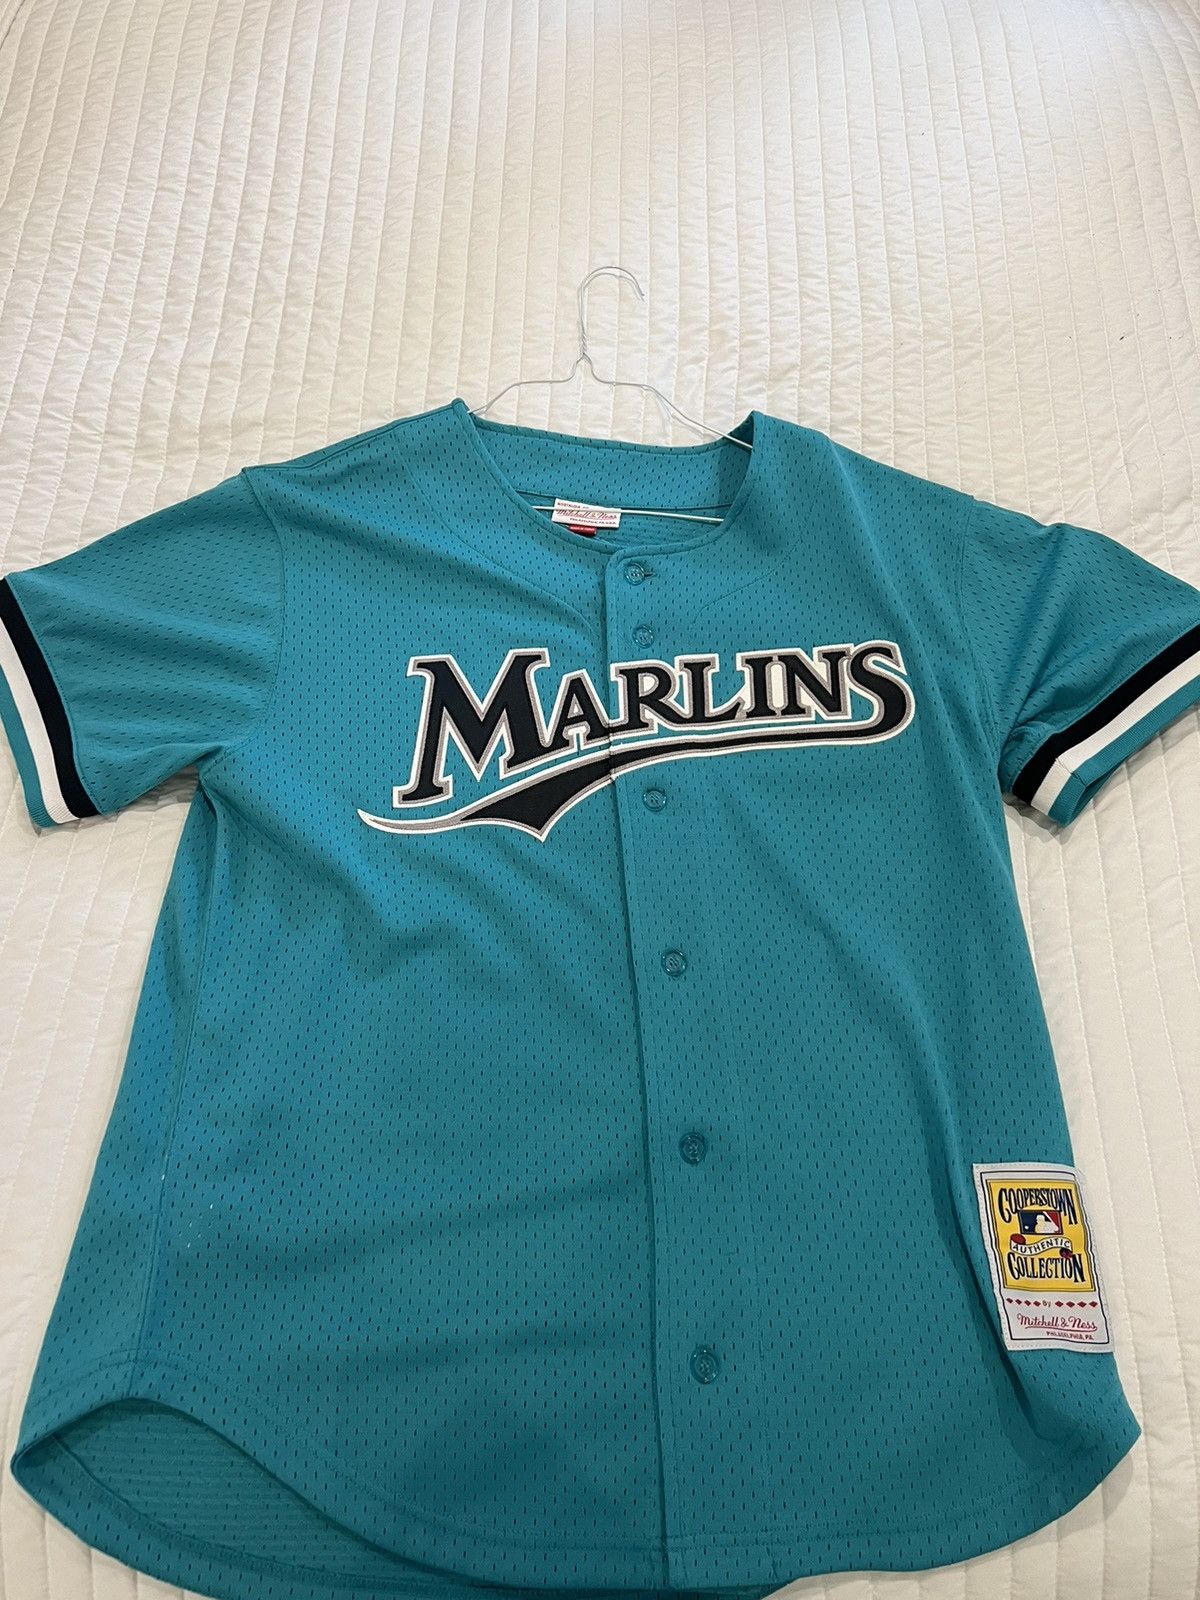 Mitchell & Ness AUTHENTIC Mitchell & Ness Andre Dawson Marlins Jersey